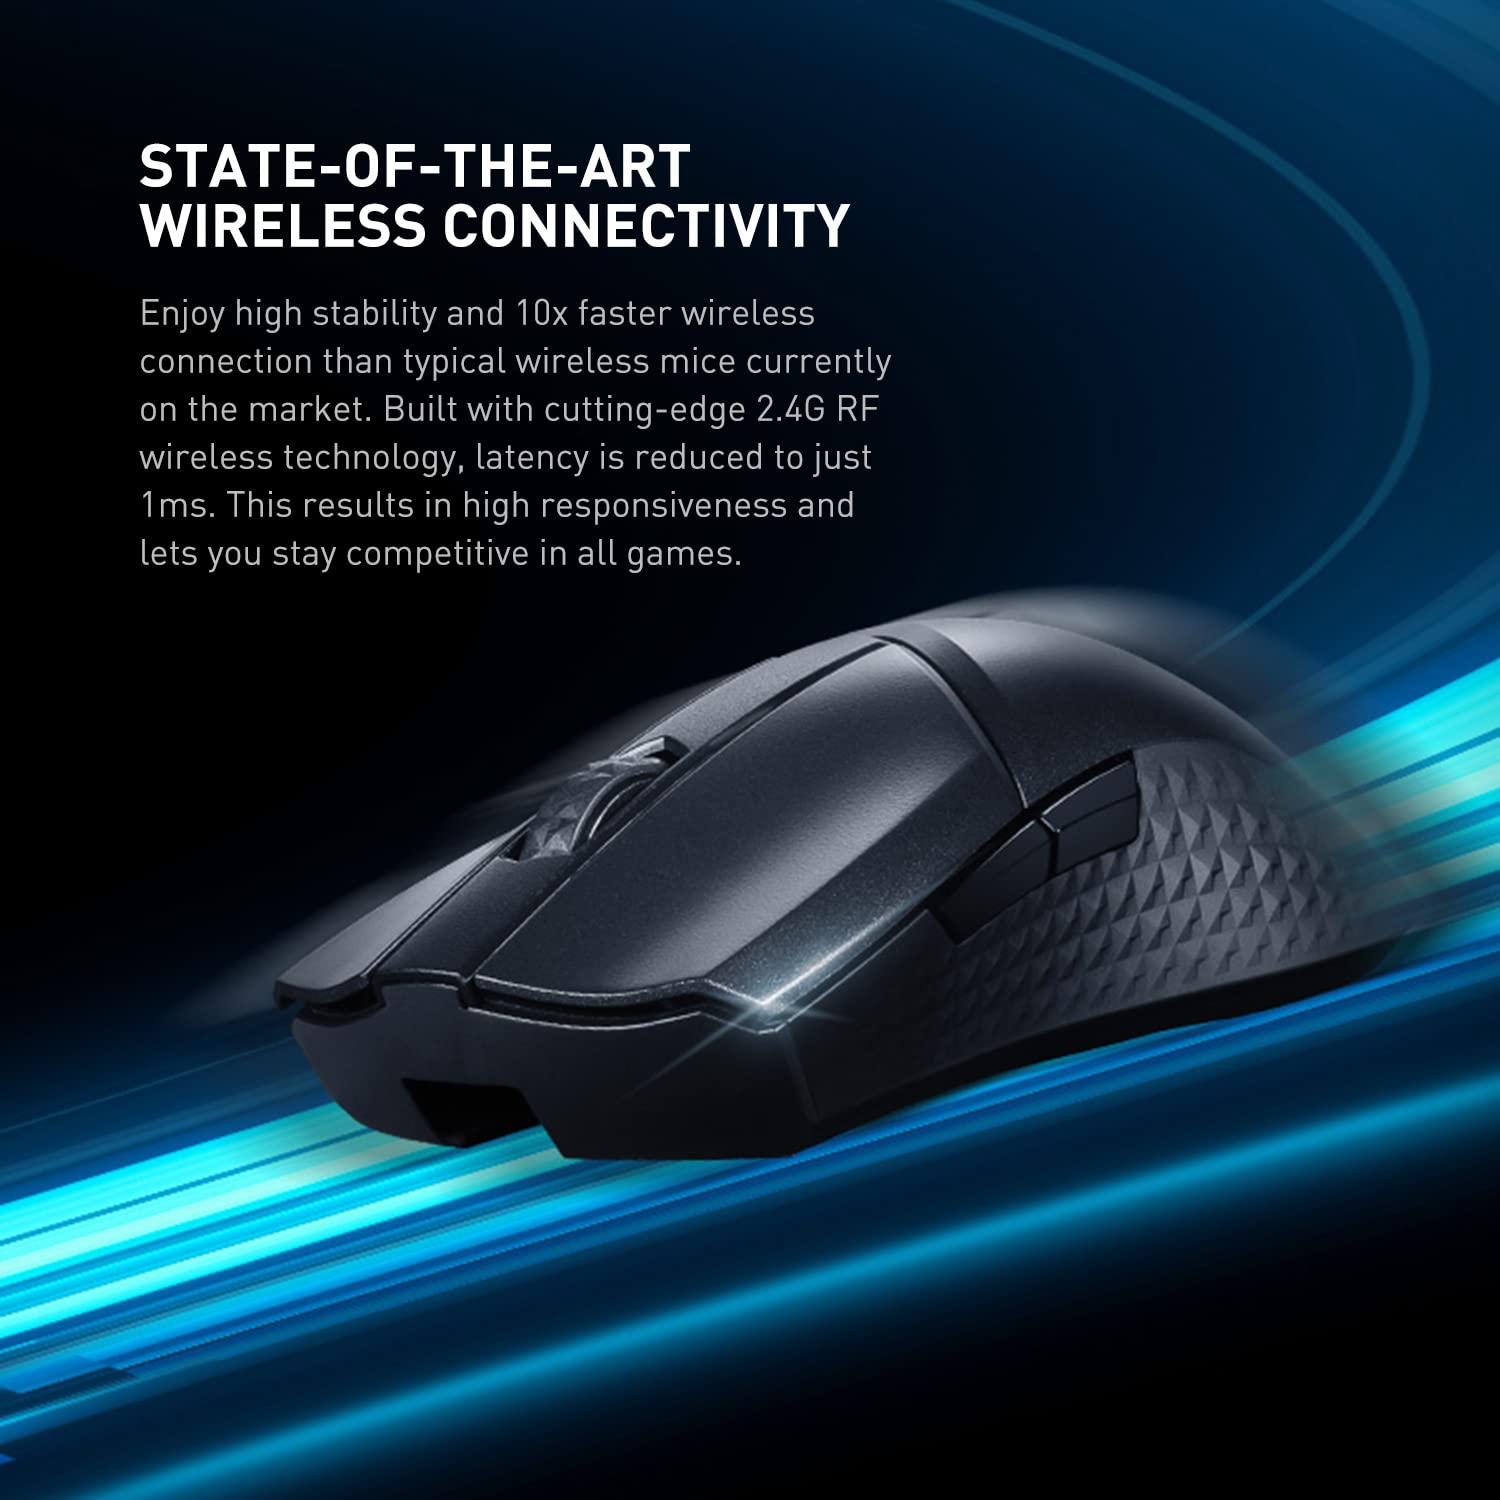 MSI Clutch GM31 Lightweight Wireless Ergonomic Gaming Mouse & Charging Dock, 12K DPI Optical Sensor, 60M Omron Switches, Fast-Charging 110Hr Battery, RGB Mystic Light, 5 Programmable Buttons, PC/Mac